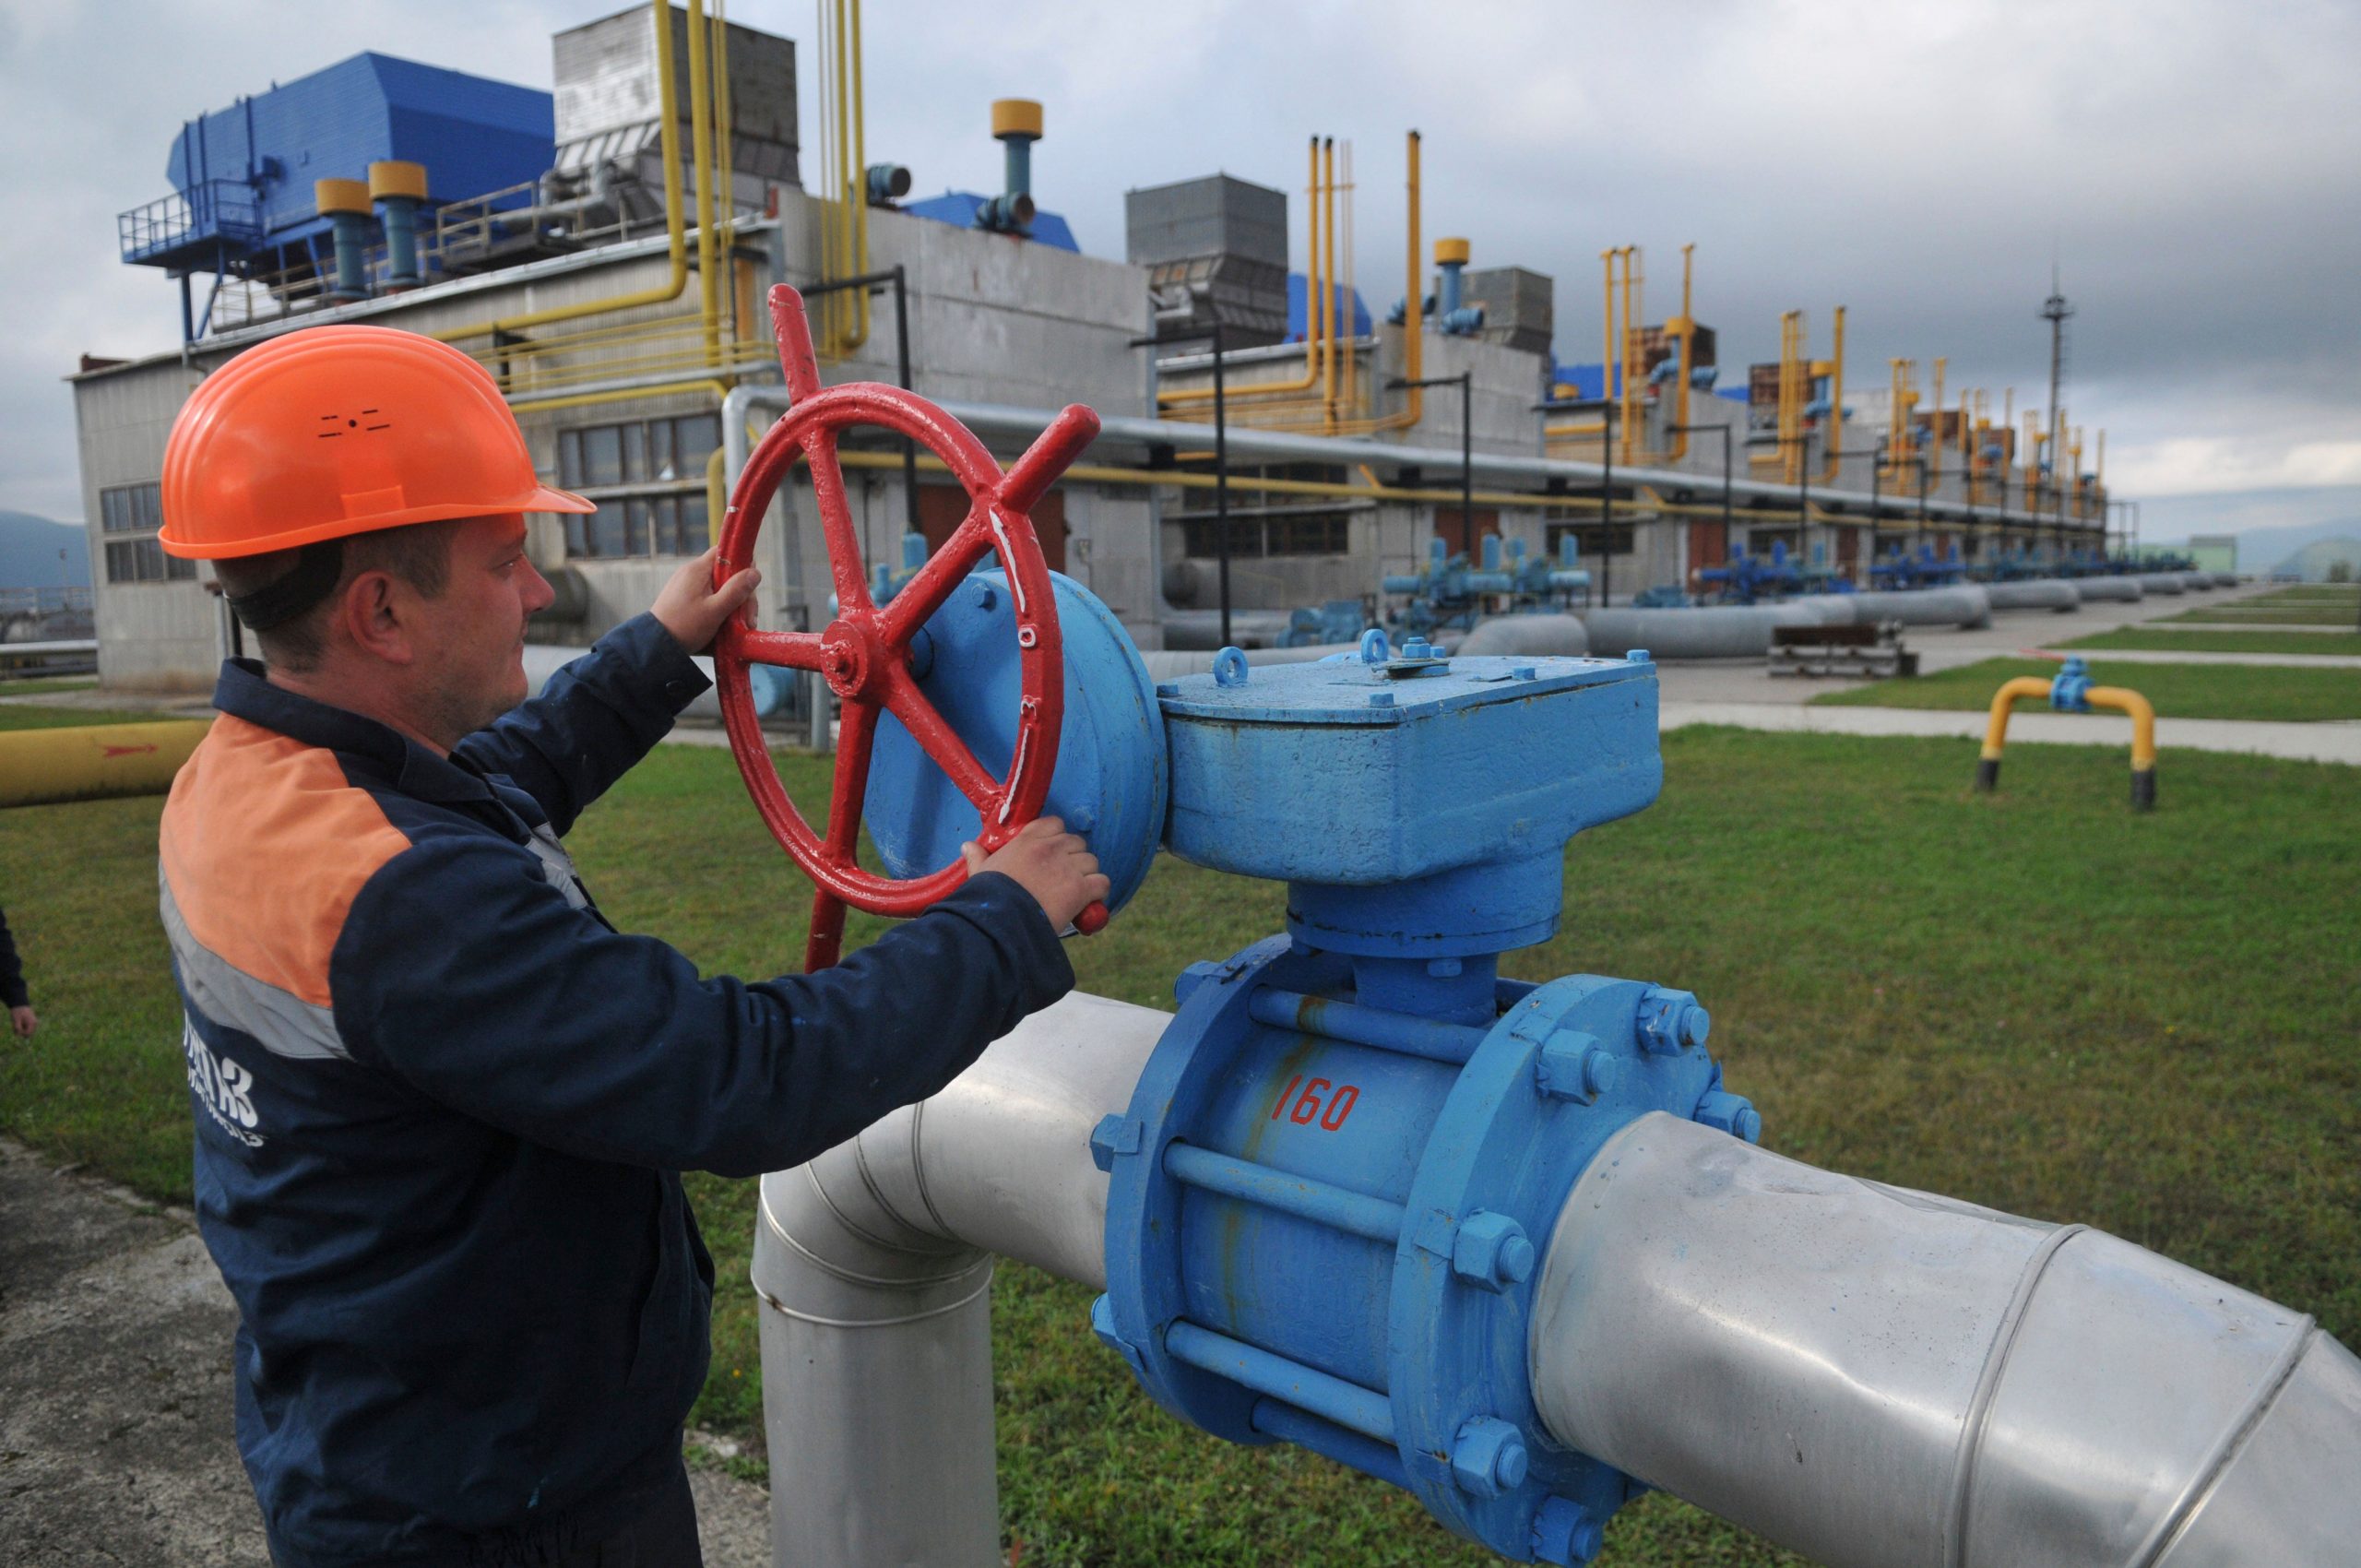 Explainer: What happens to Europe’s energy if Russia acts?